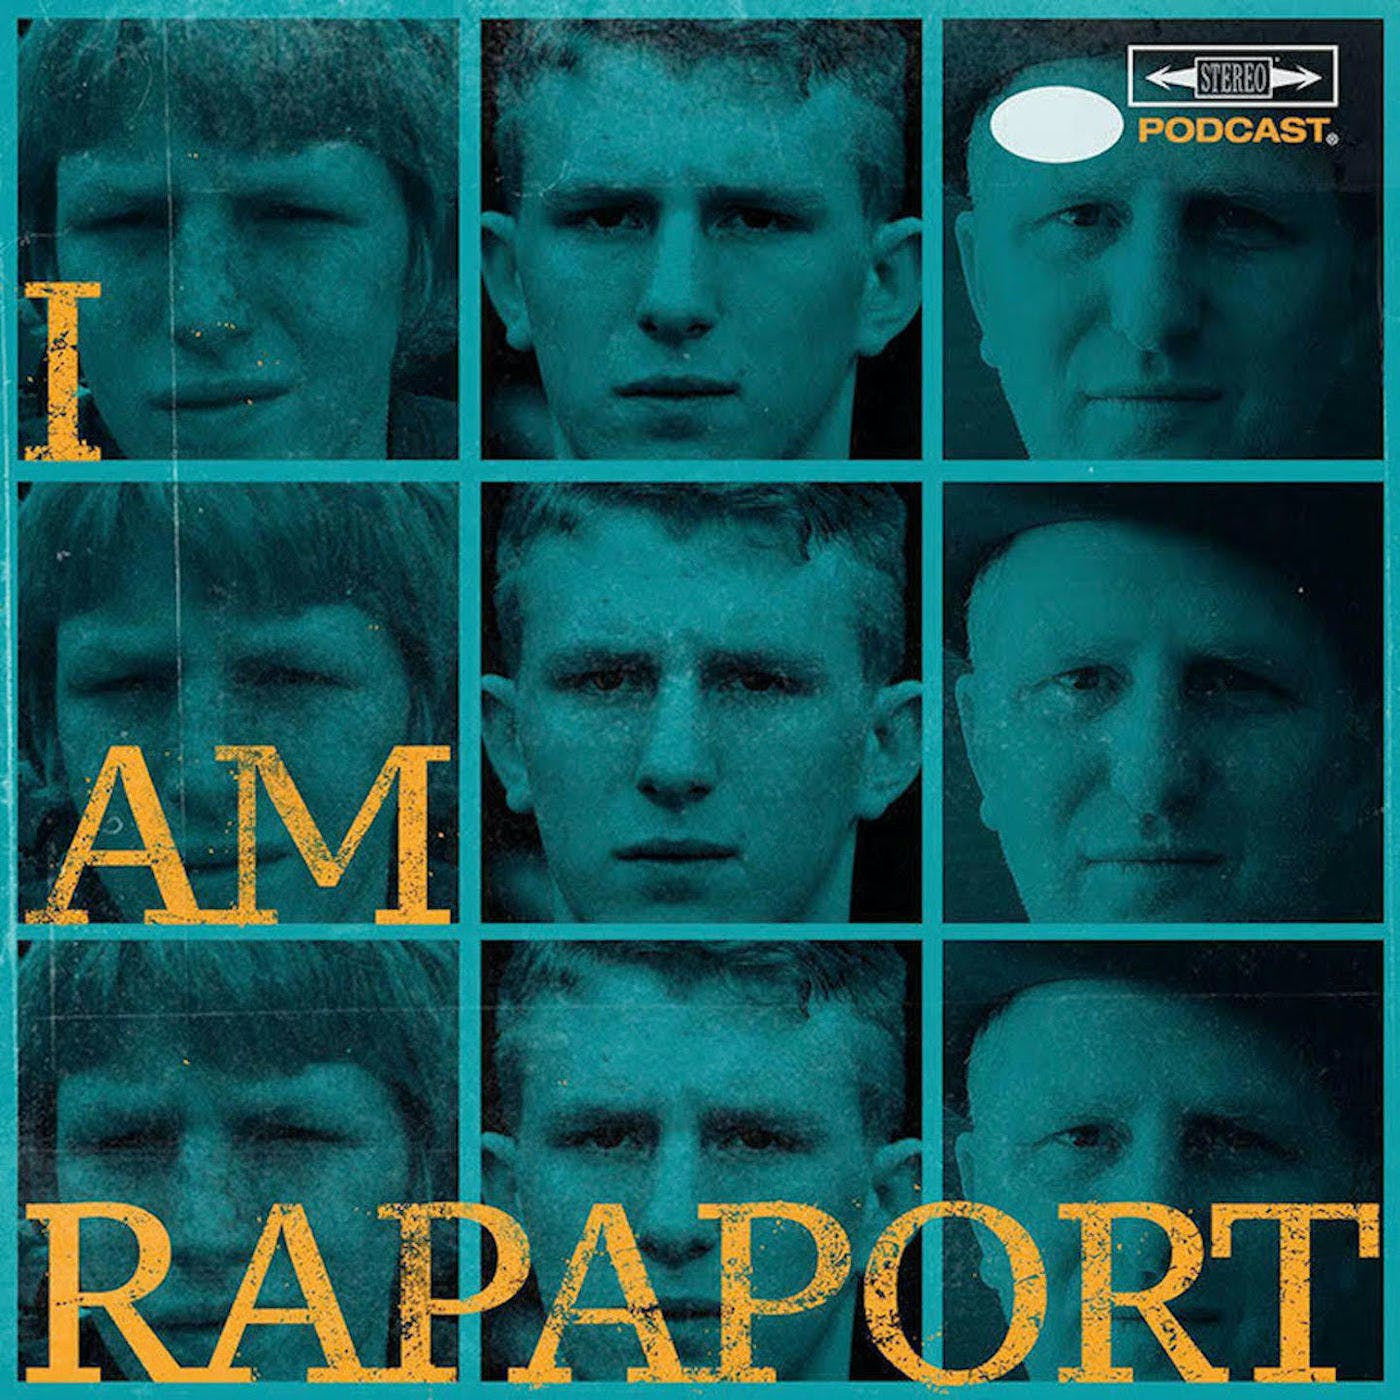 EP 189 - LIVE FROM MINNEAPOLIS, MINNESOTA! MICHAEL RAPAPORT AND GERALD MOODY - I AM RAPAPORT: STEREO PODCAST 3 CITY WORLD TOUR